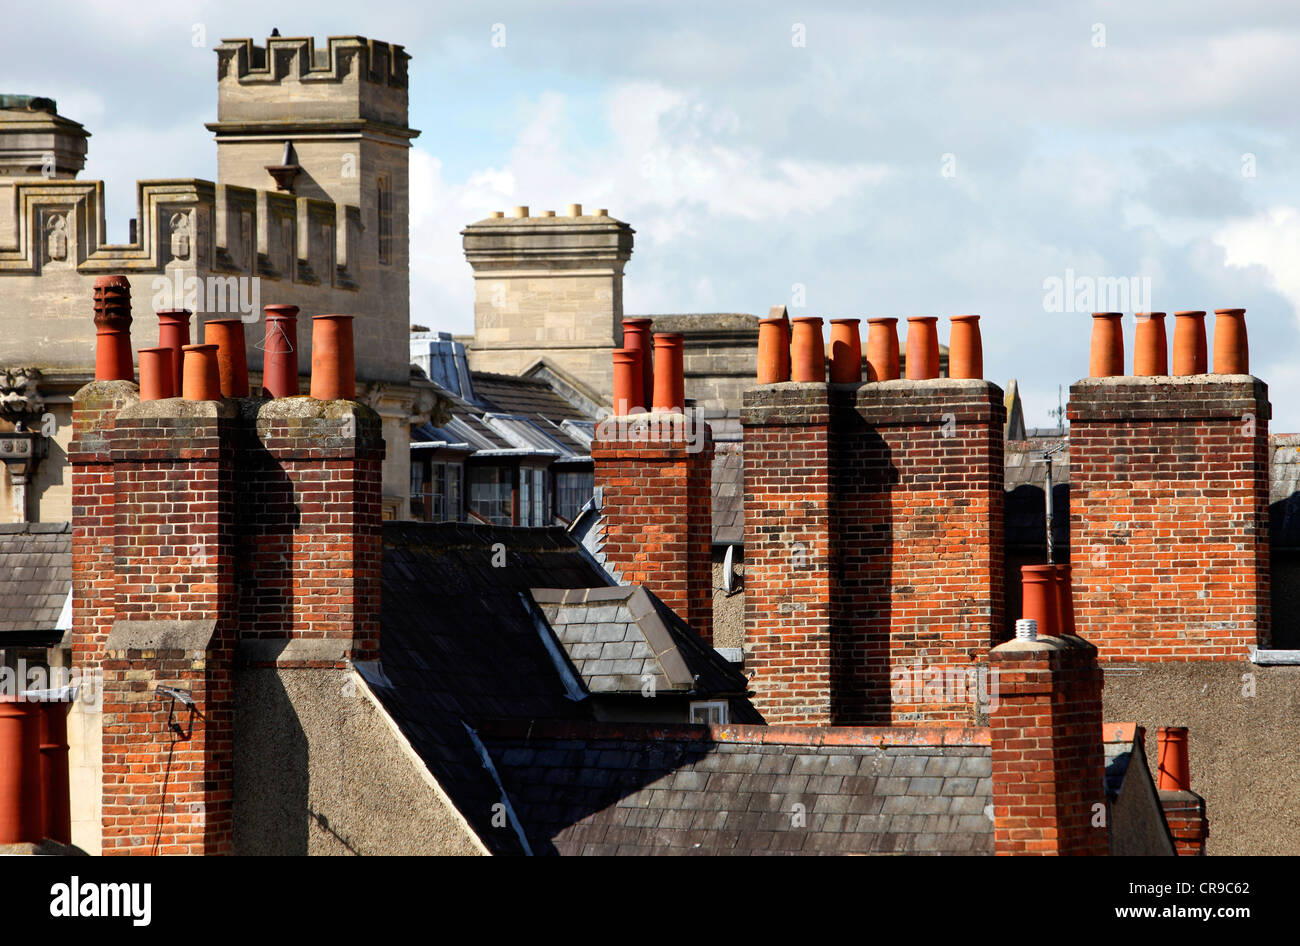 Typical chimneys on roofs of houses in Oxford, Oxfordshire, UK, Europe Stock Photo